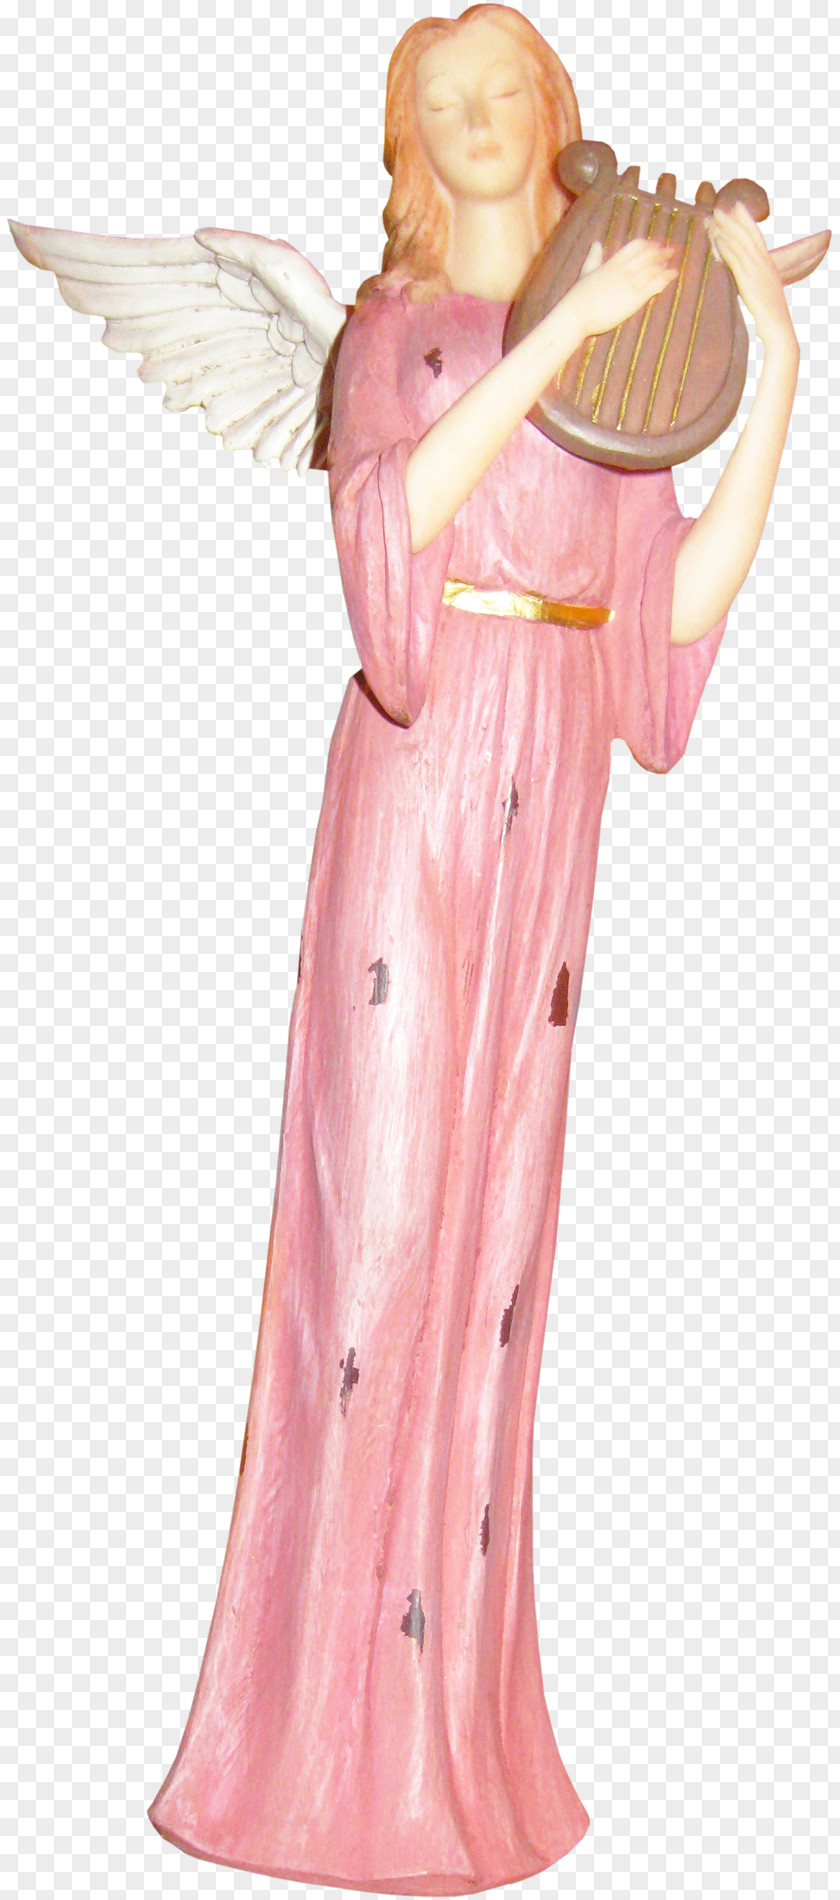 Pretty Pink Angel Sculpture Drawing PNG